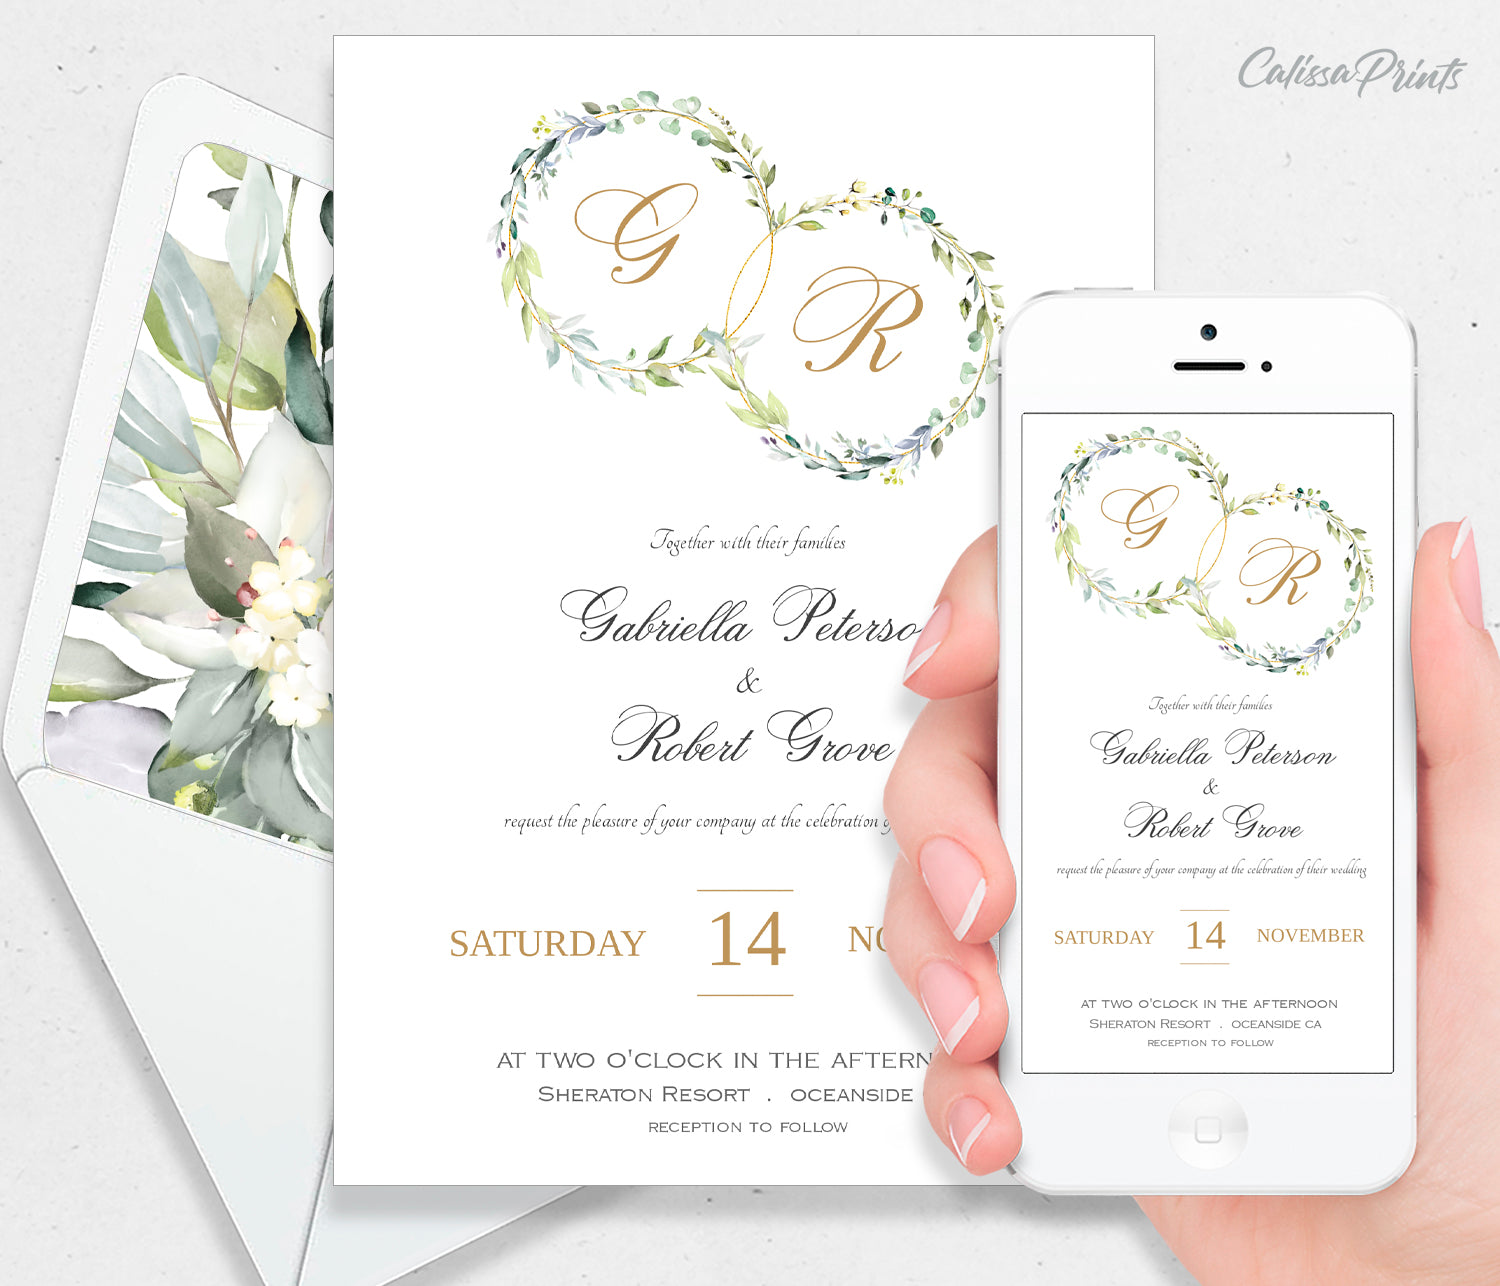 Wedding Invitation Templates – CLAIRE - Green Leaves, Herbs Design, WED01 - CalissaPrints